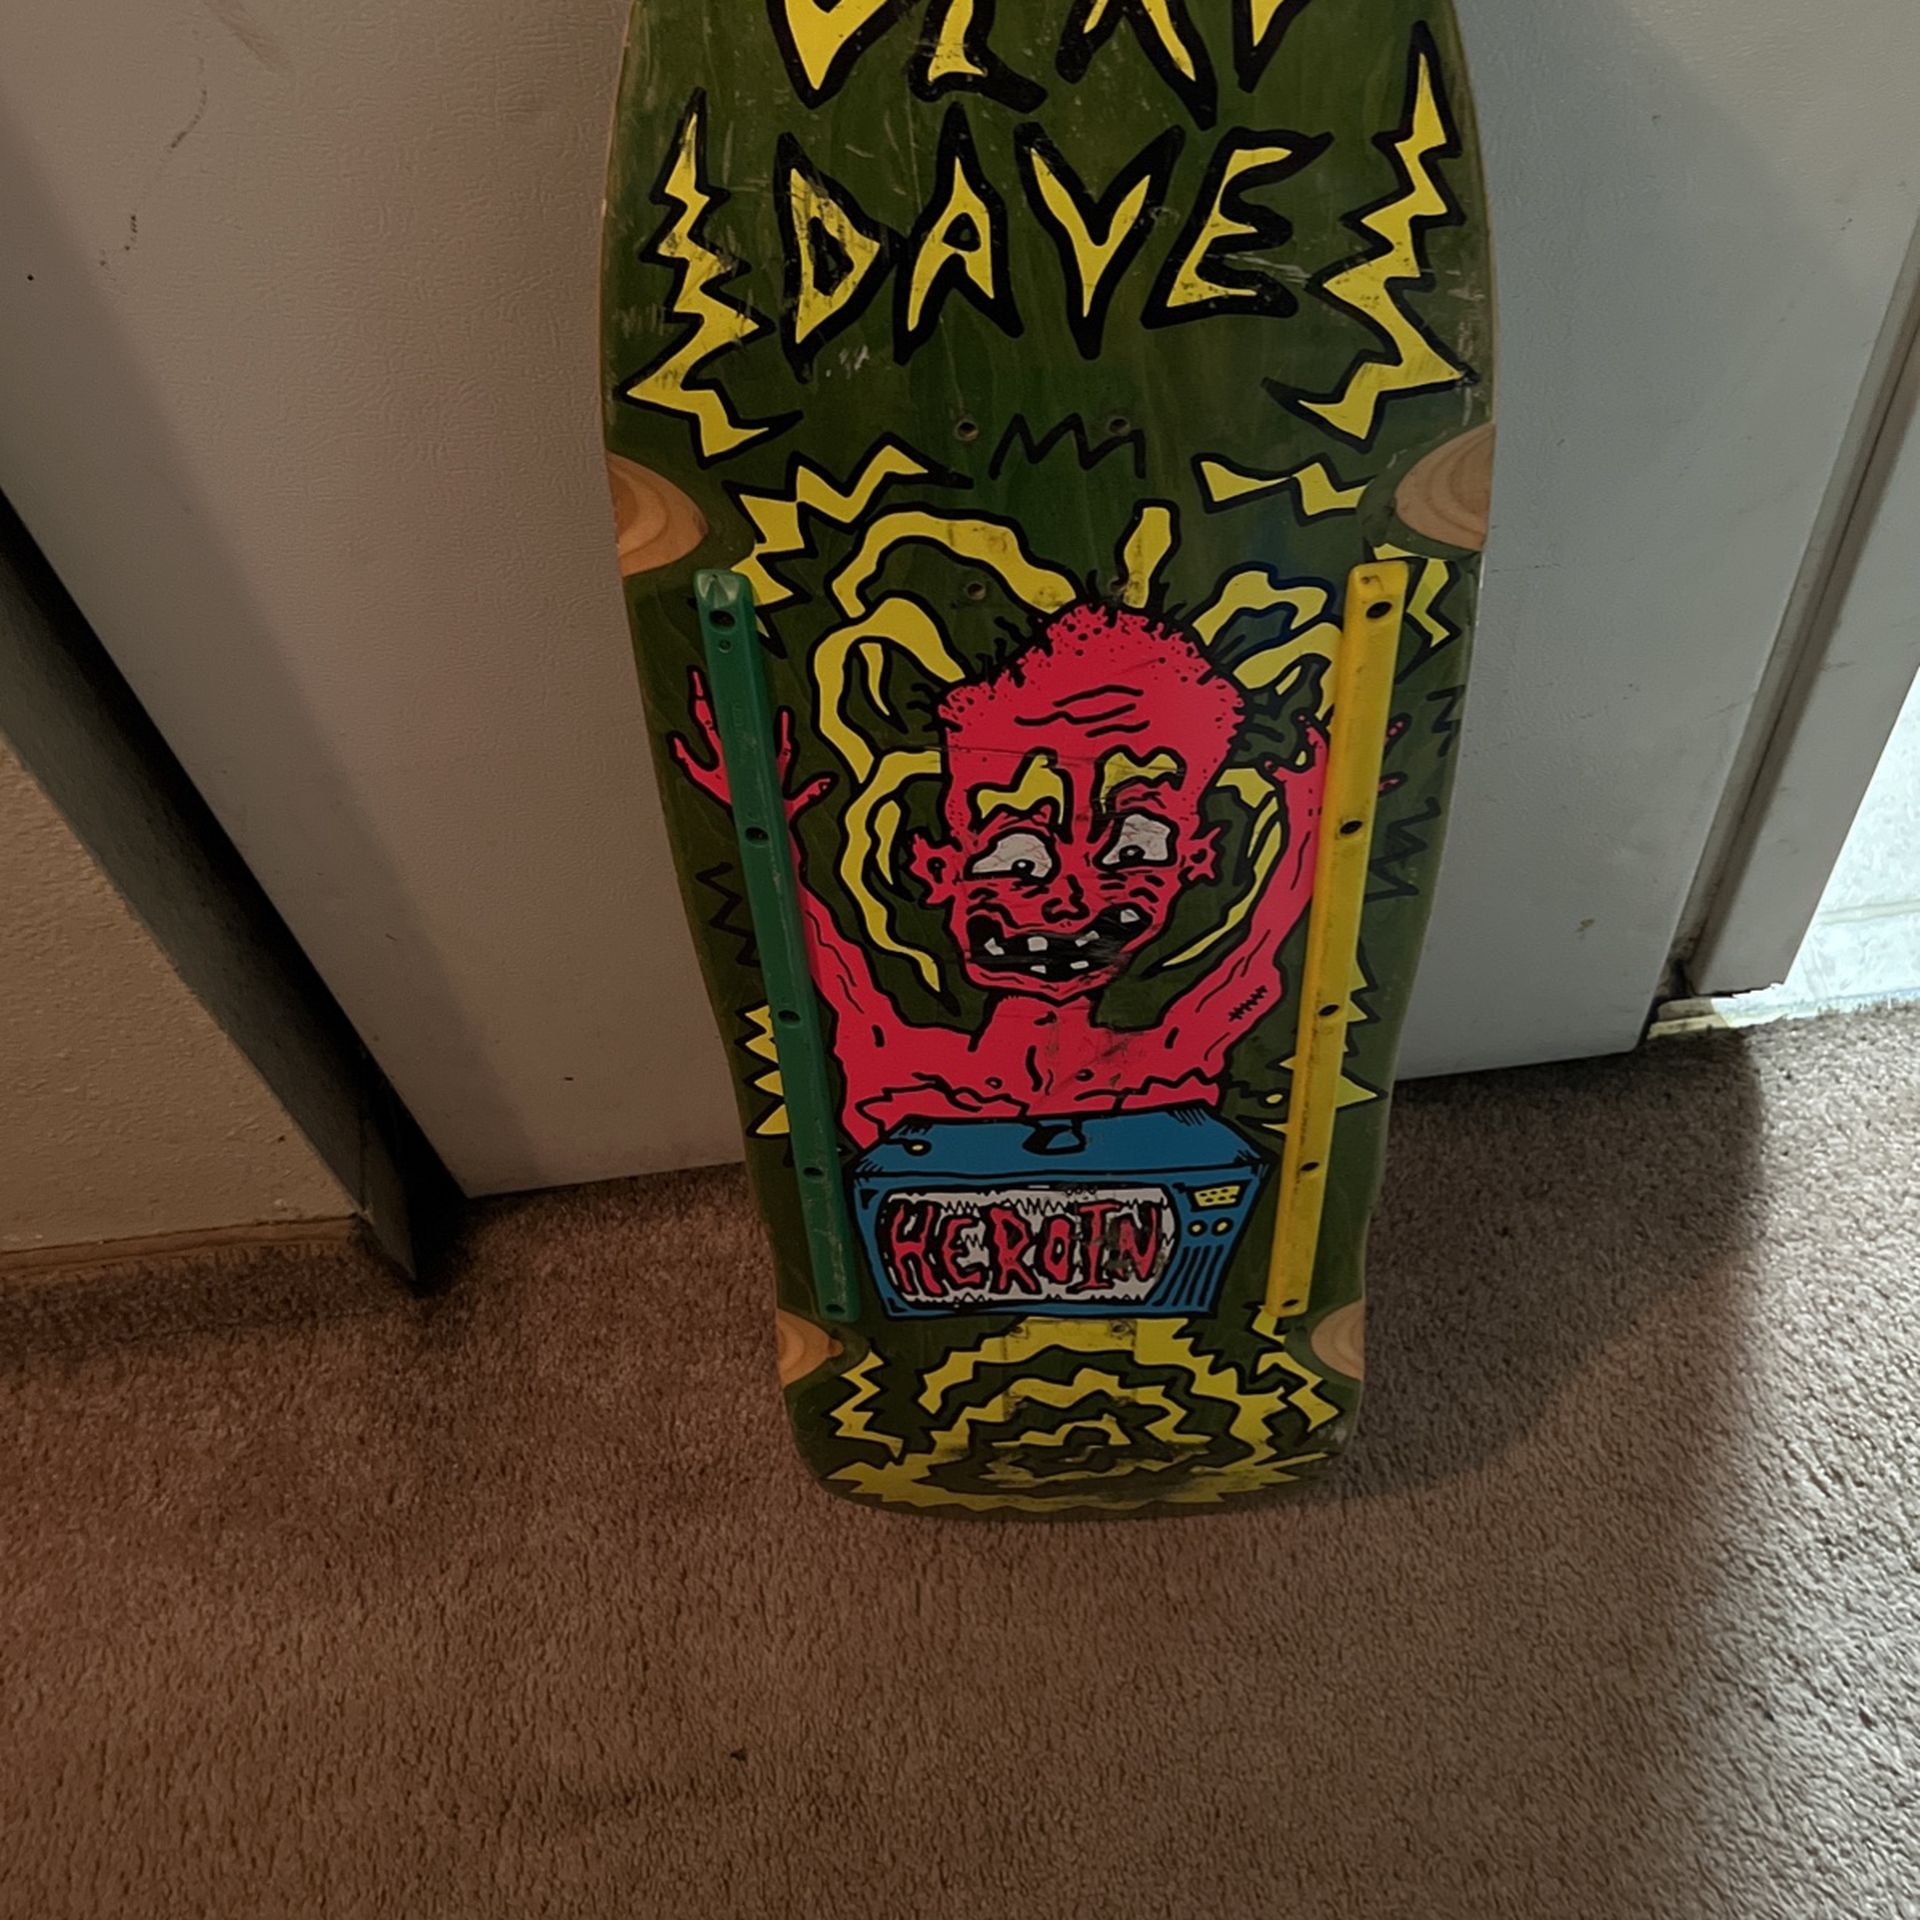 Dead Dave Herion Skate Board( Just The Deck)